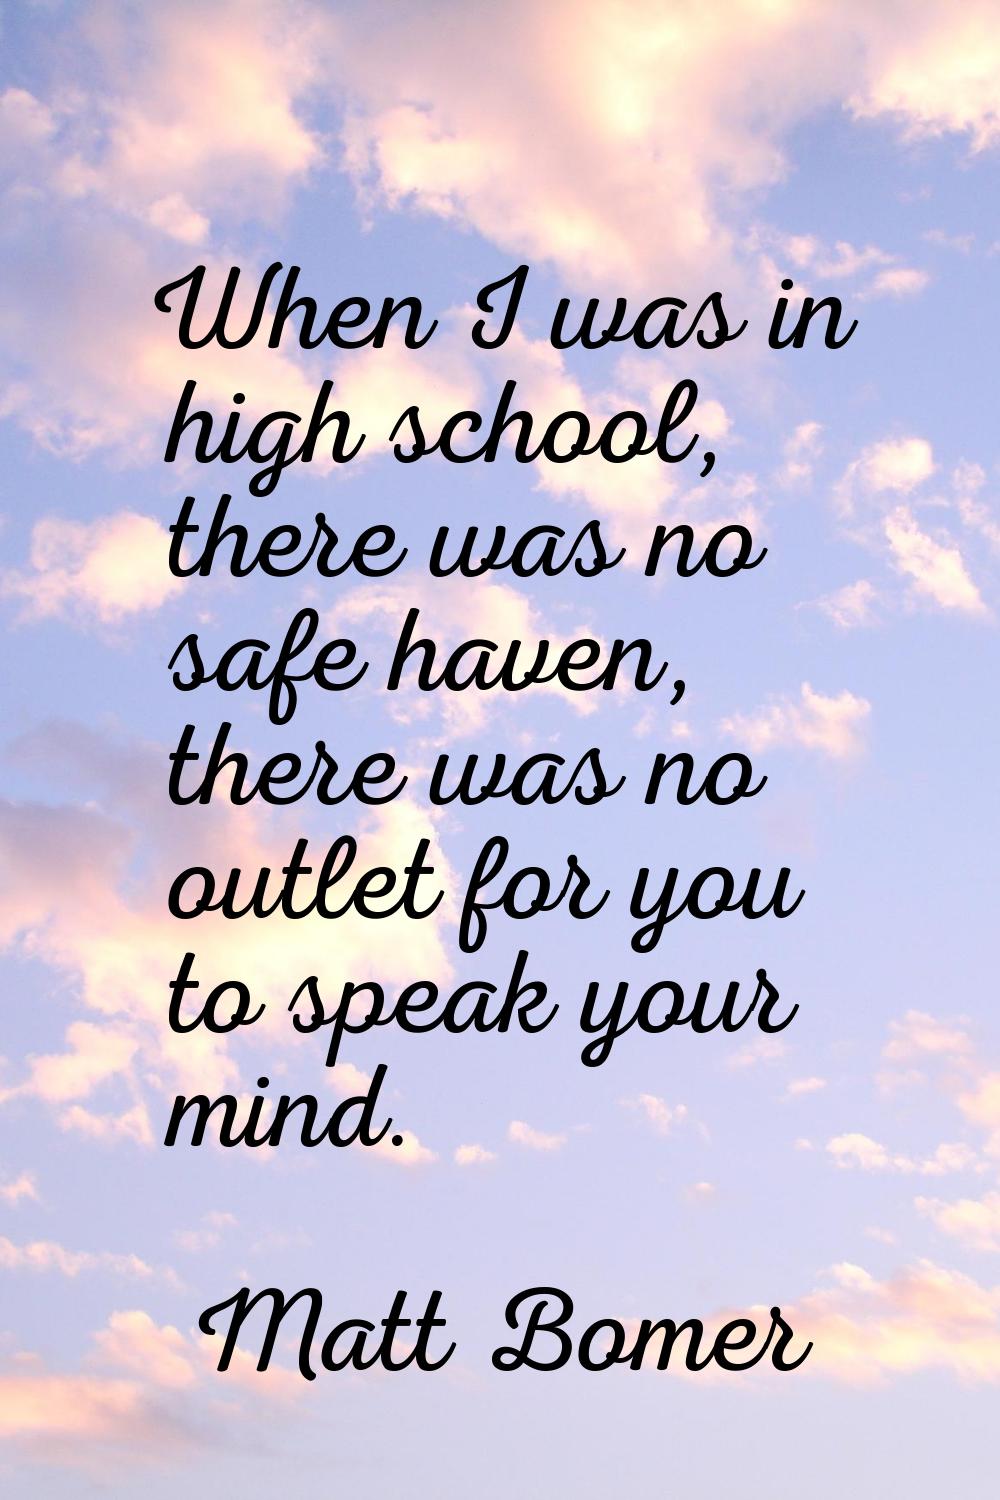 When I was in high school, there was no safe haven, there was no outlet for you to speak your mind.